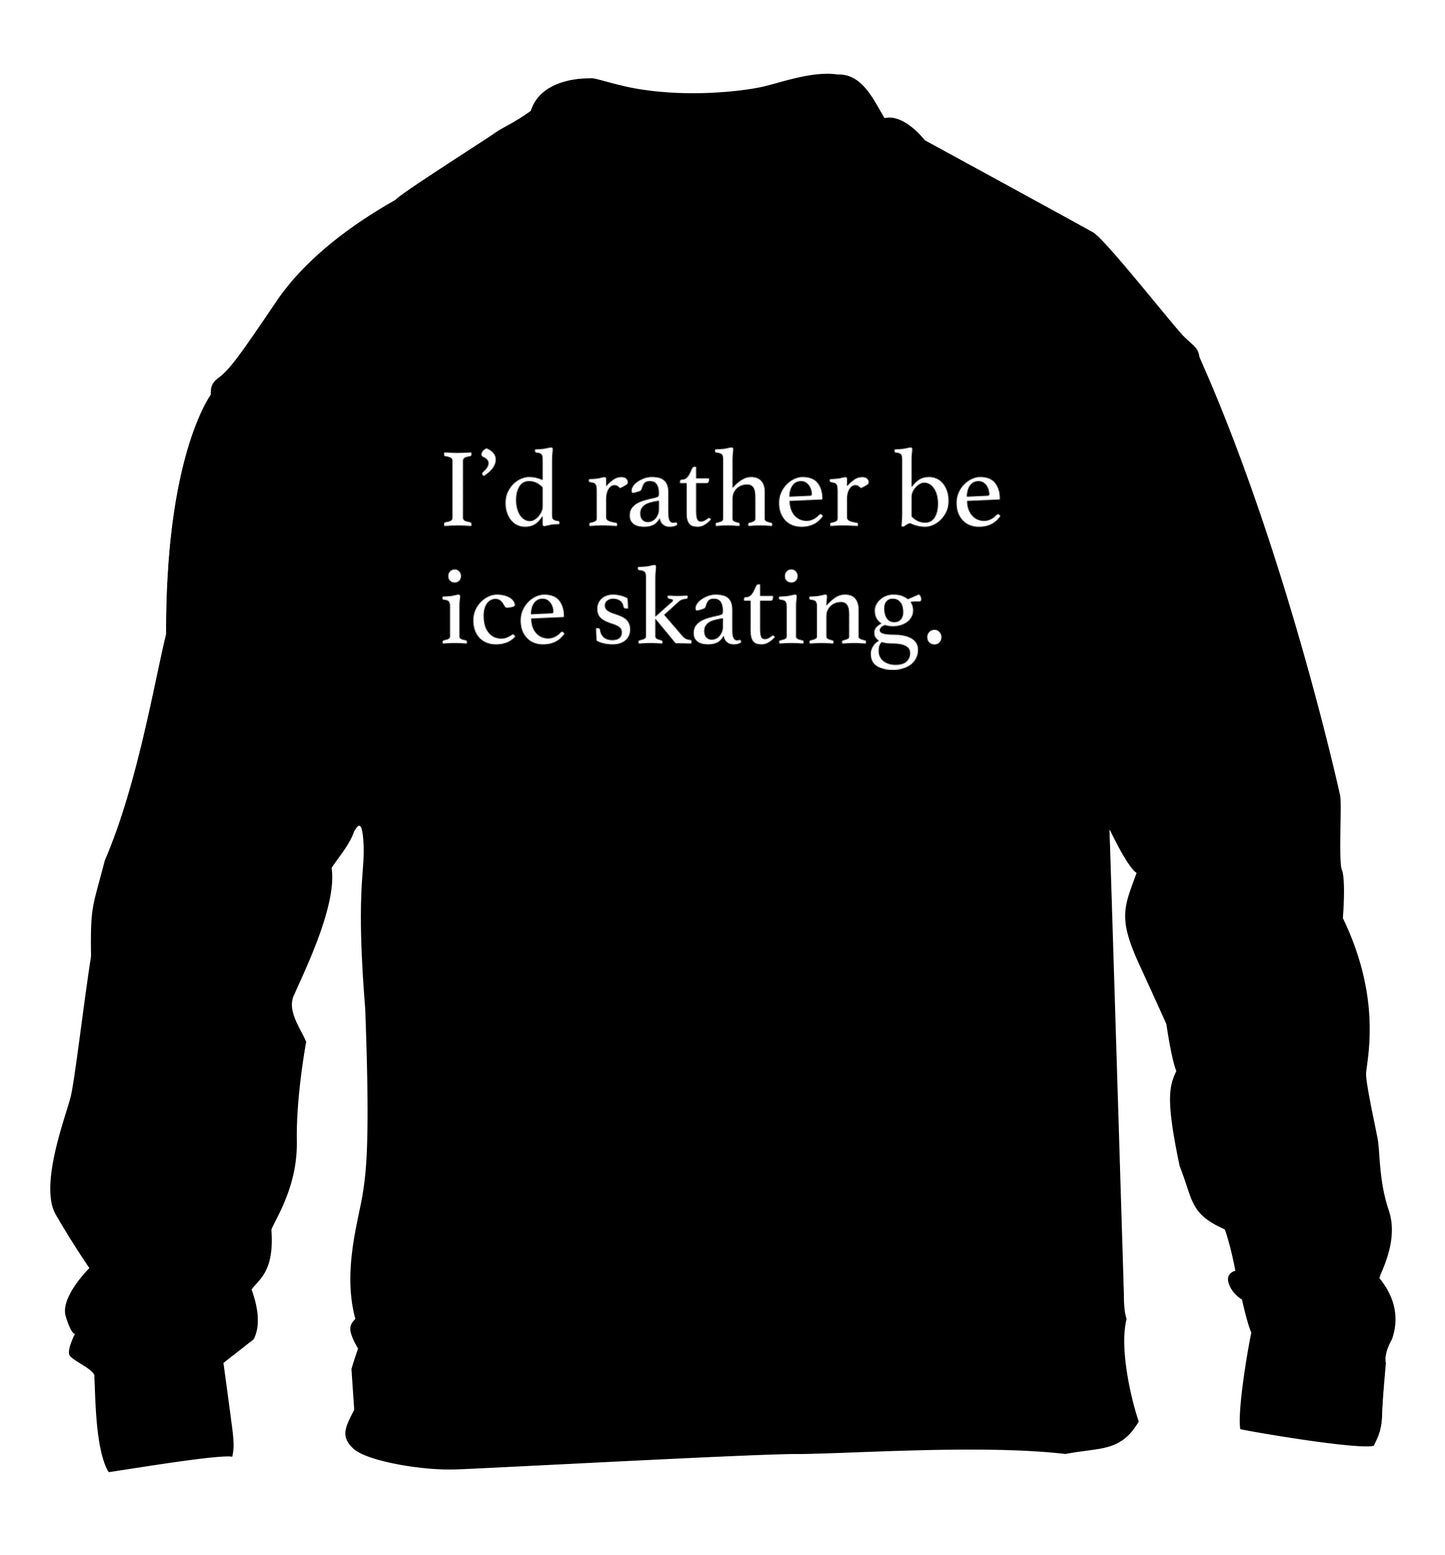 I'd rather be ice skating children's black sweater 12-14 Years